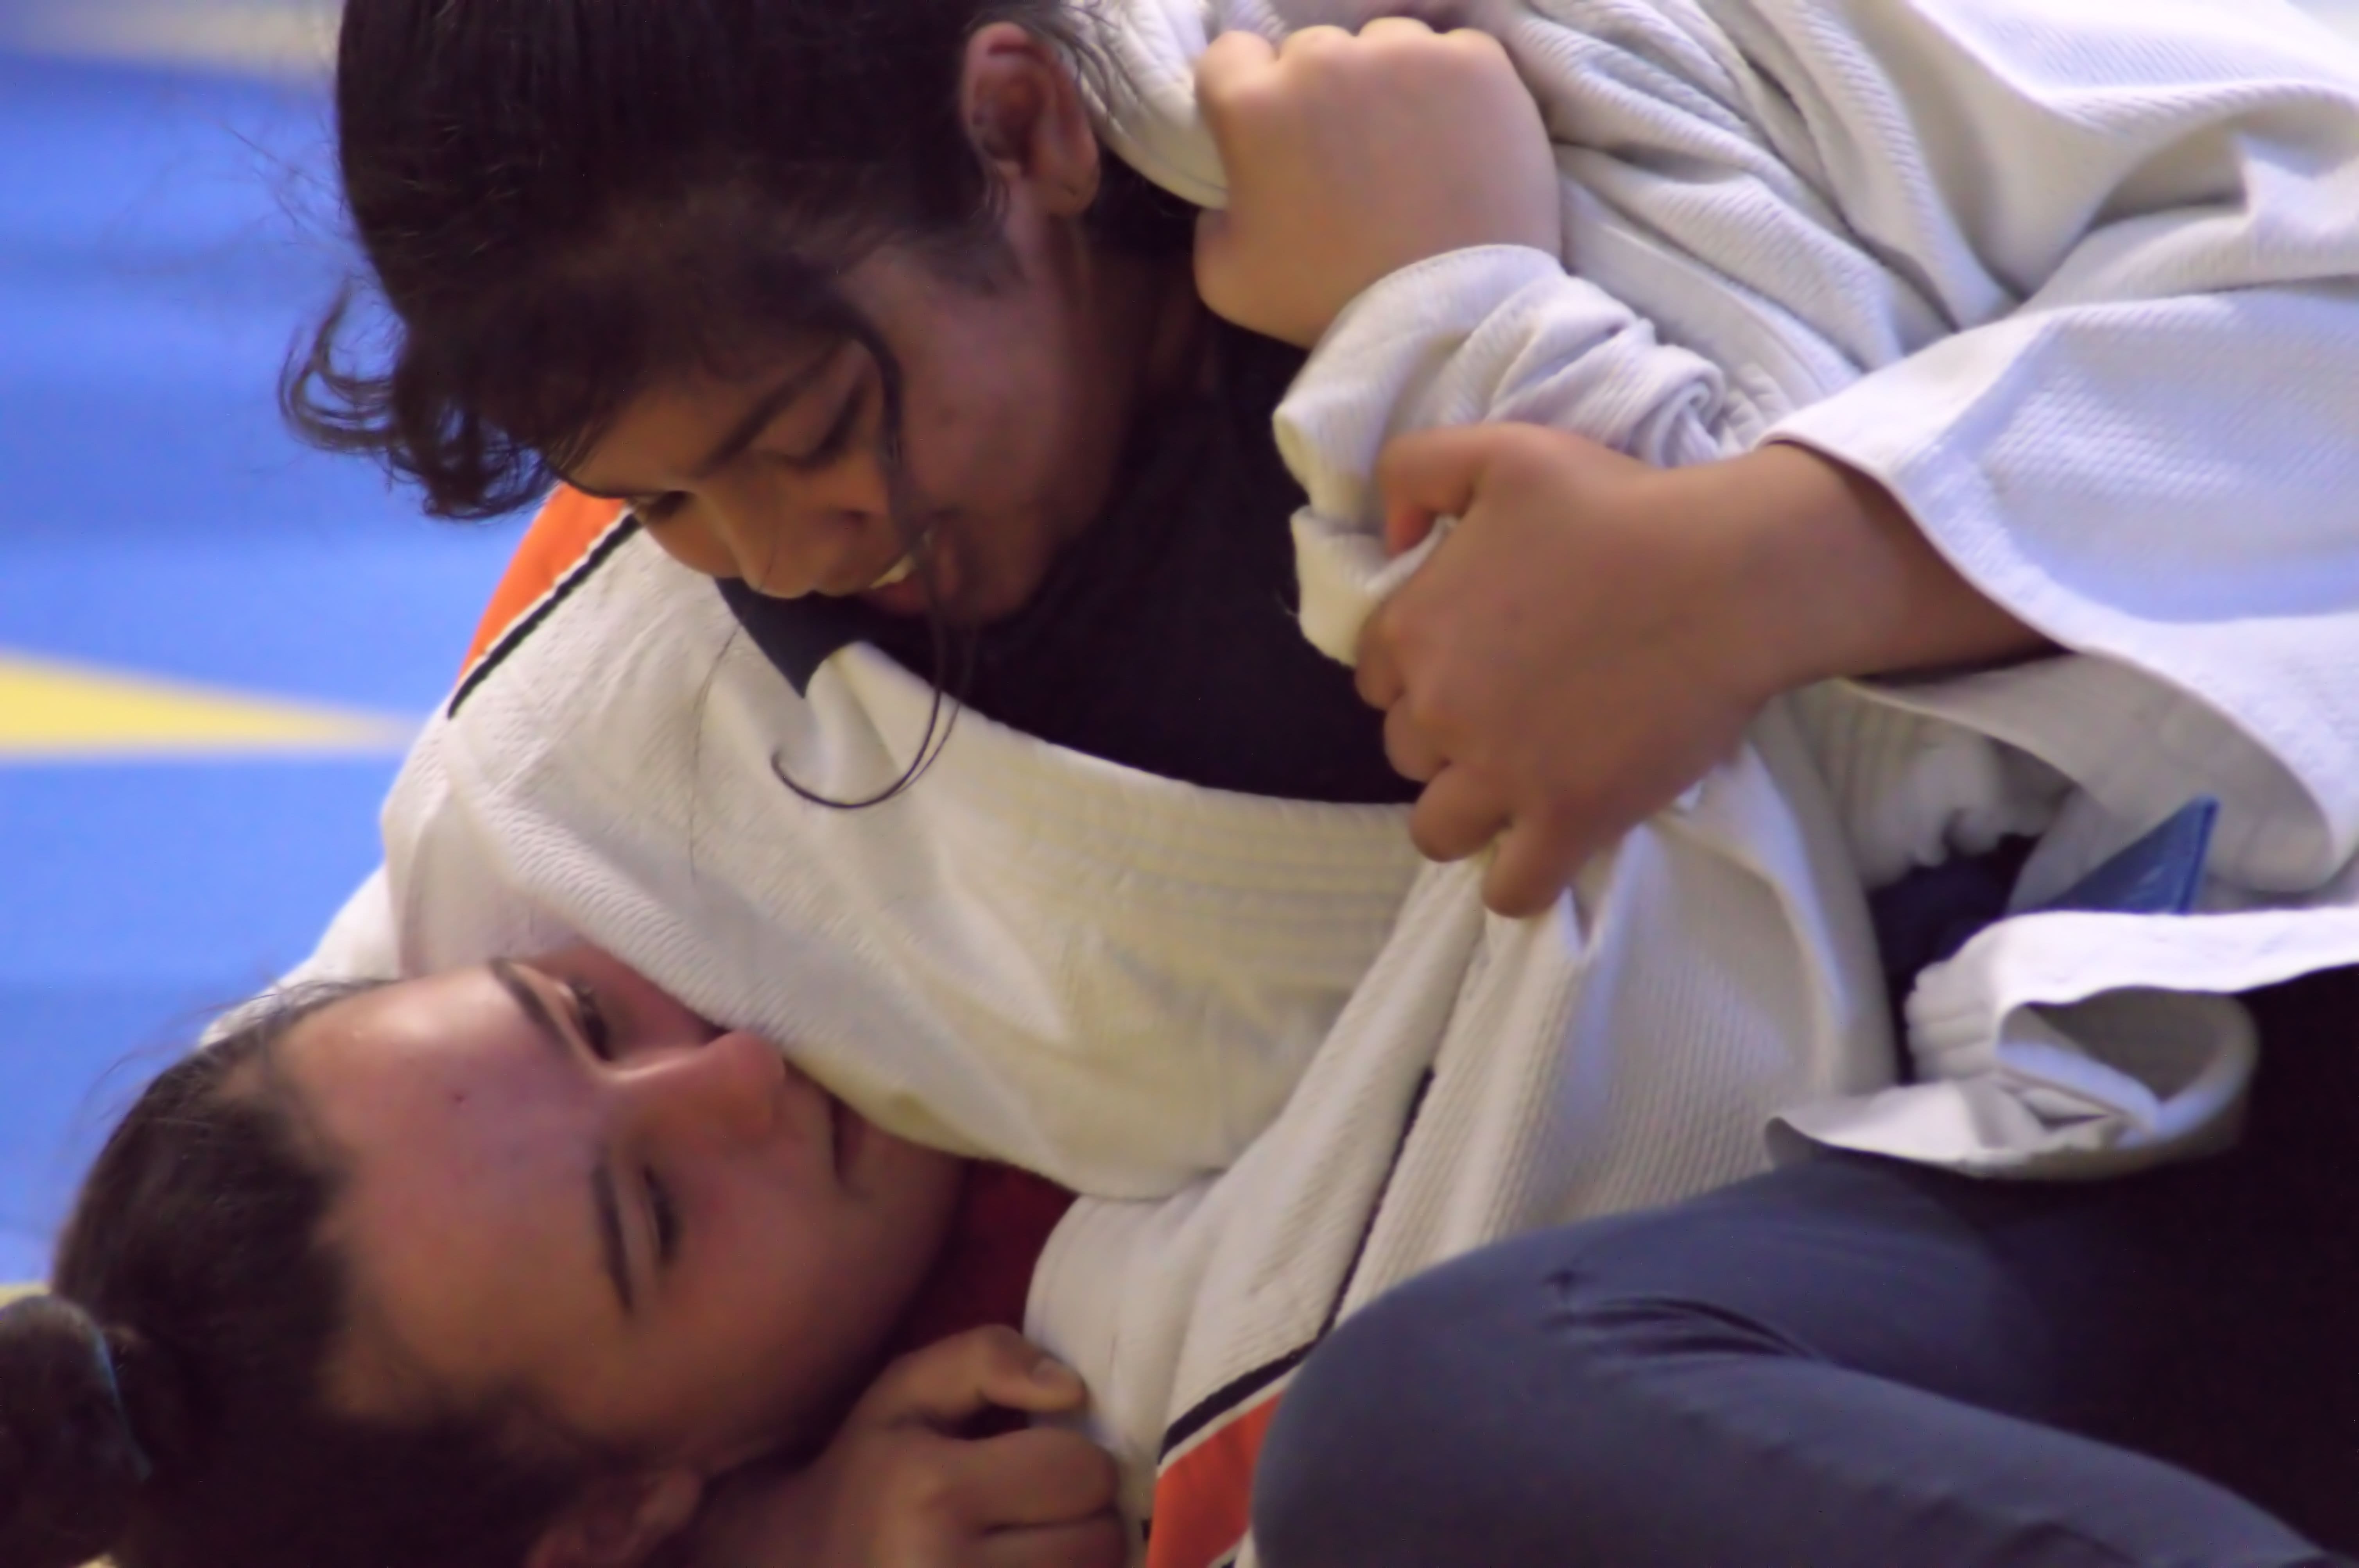 two girls competing in a judo match